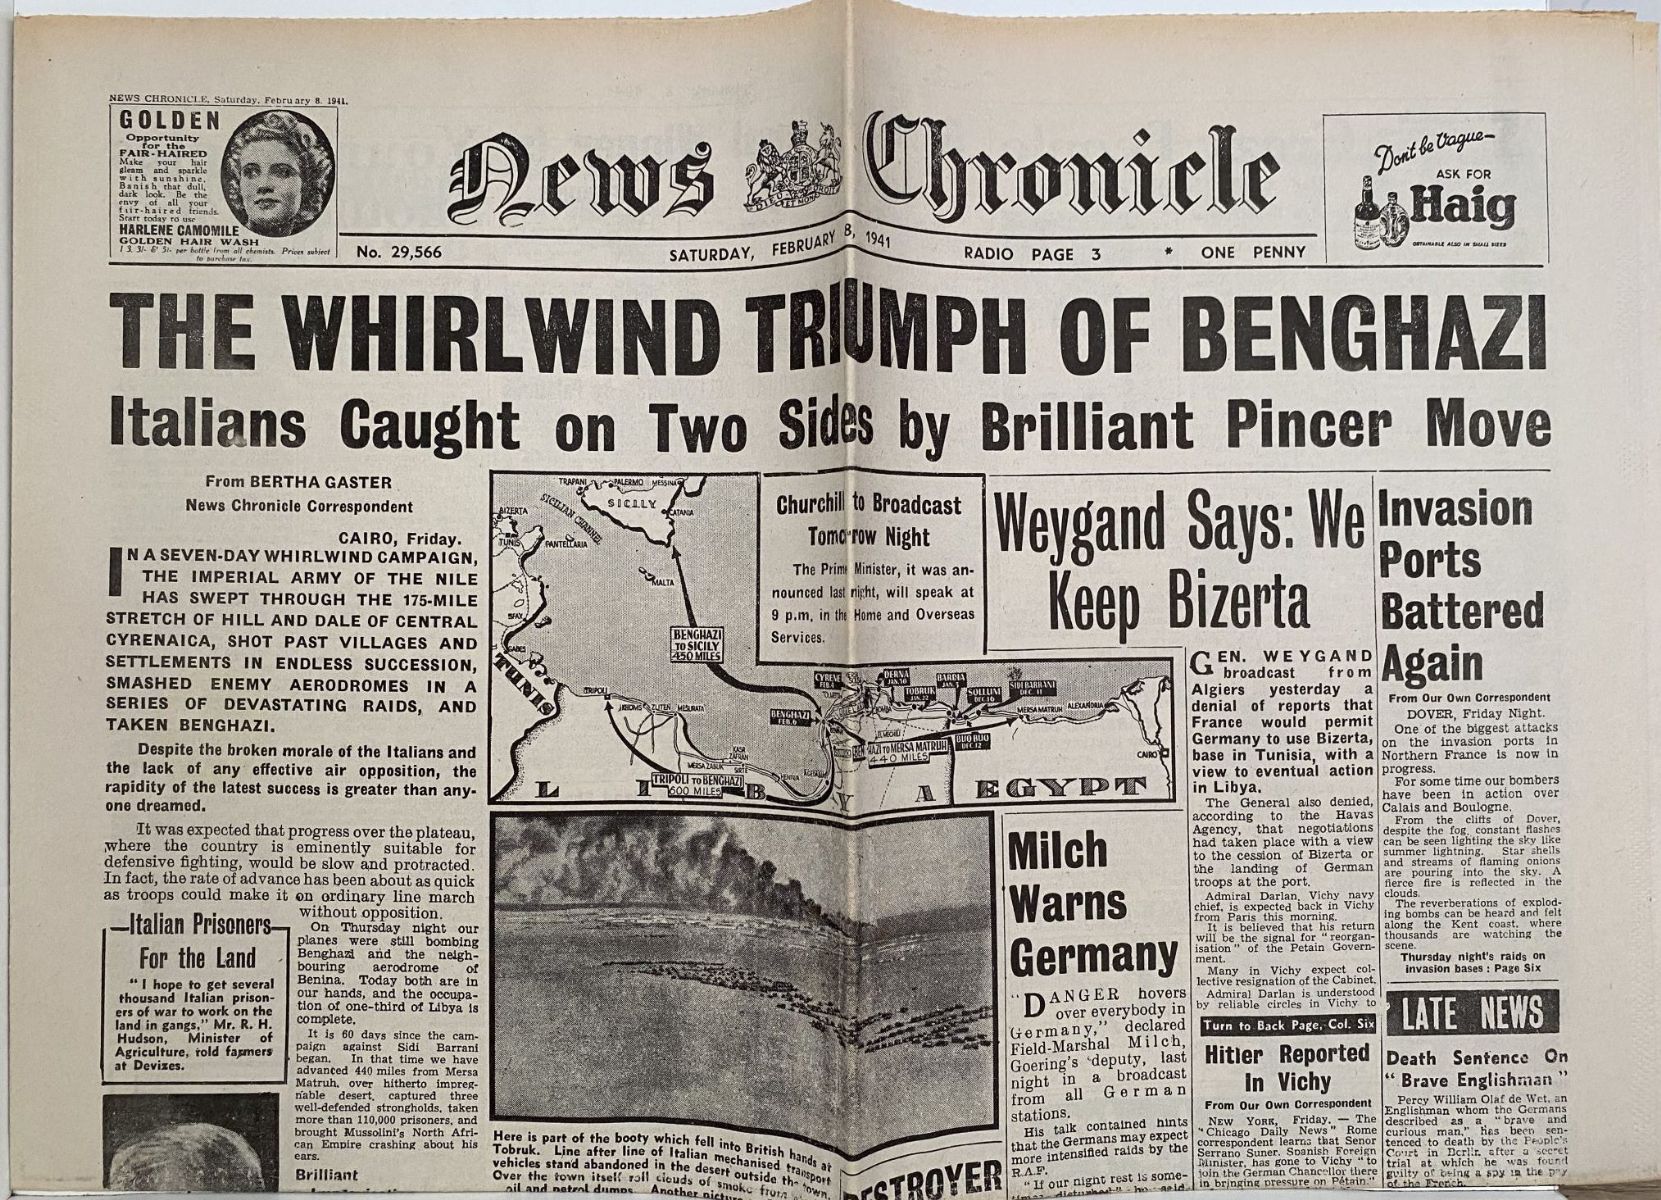 OLD WARTIME NEWSPAPER: News Chronicle, Saturday 8th February 1941